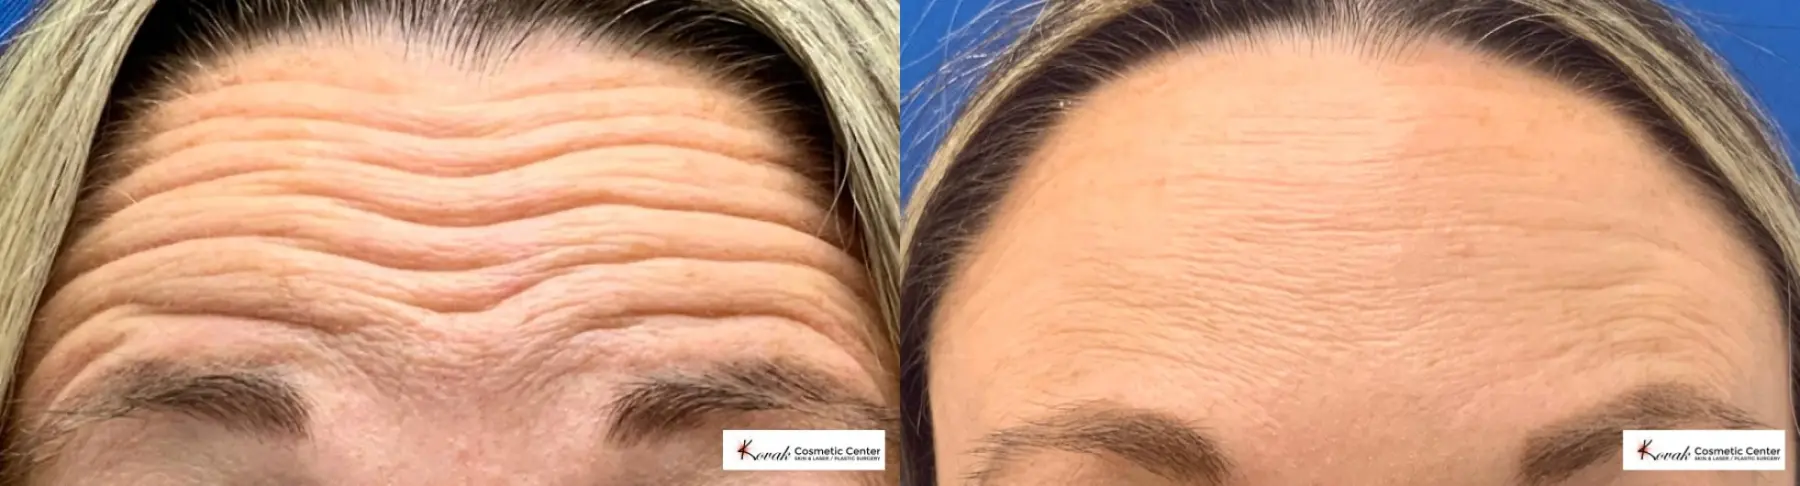 Restylane Silk for Forehead lines on a 35 year old female - Before and After 1